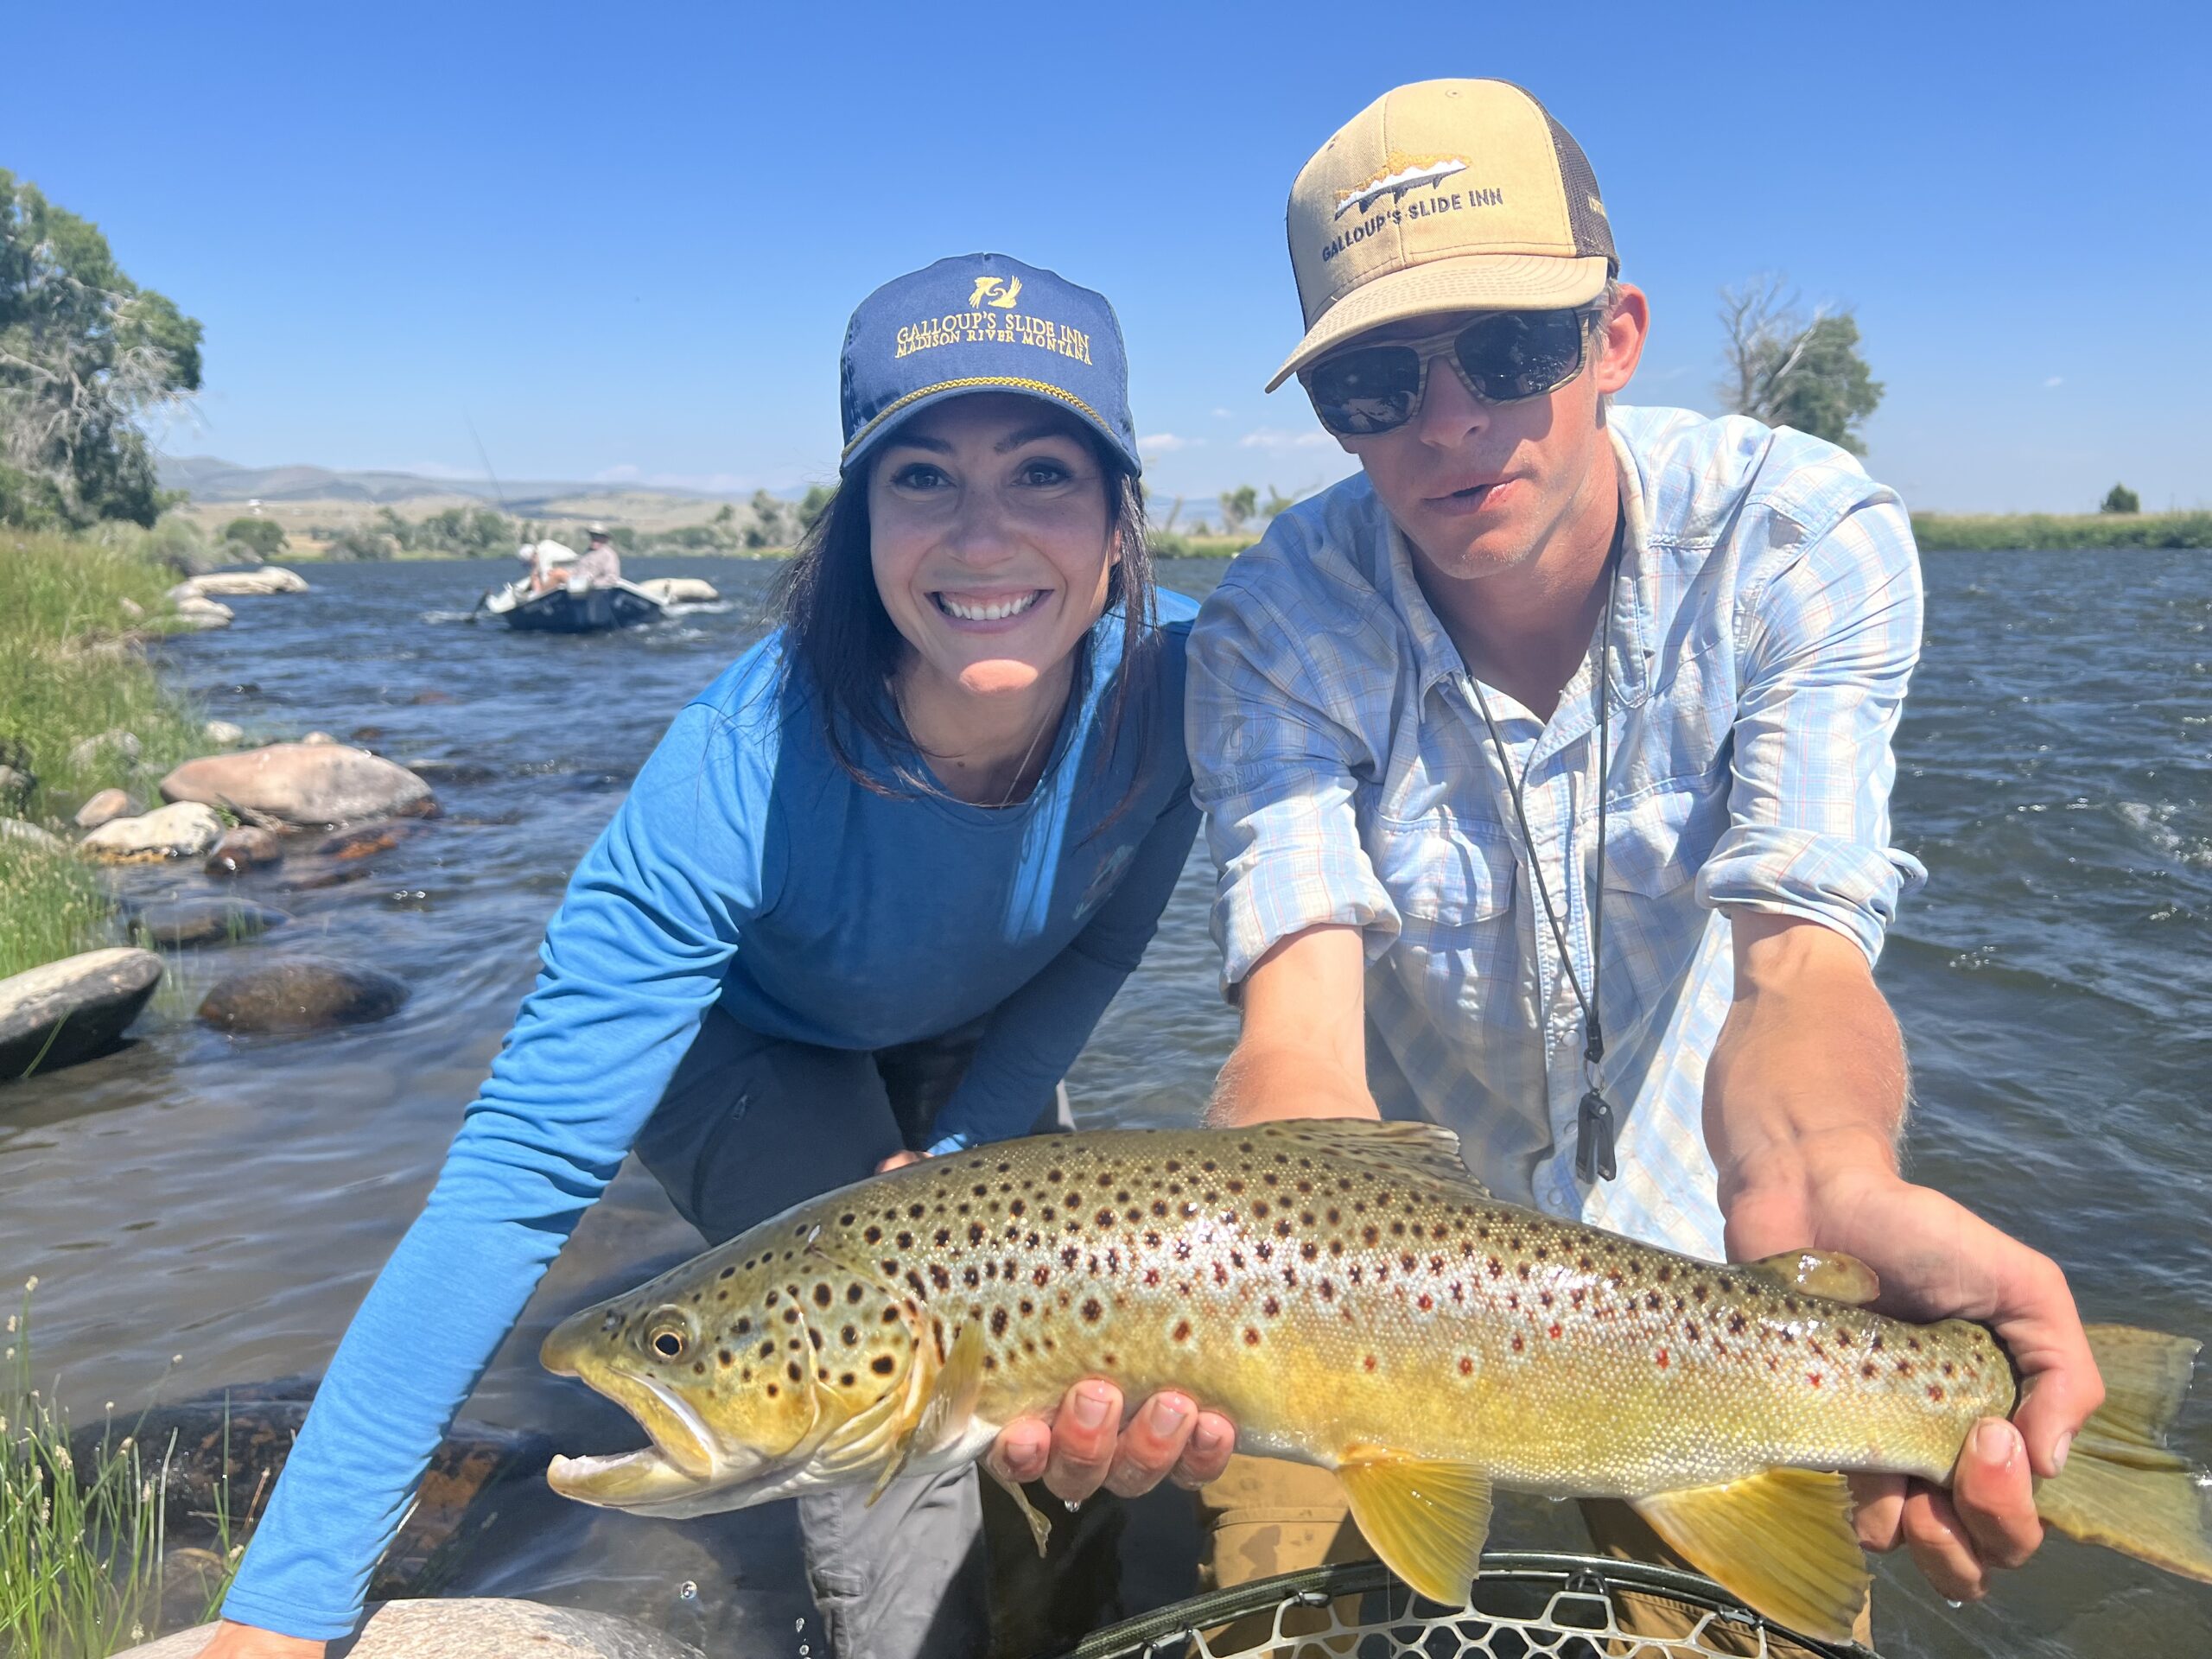 Vlog: My First Time Fly Fishing in Montana! - April Vokey